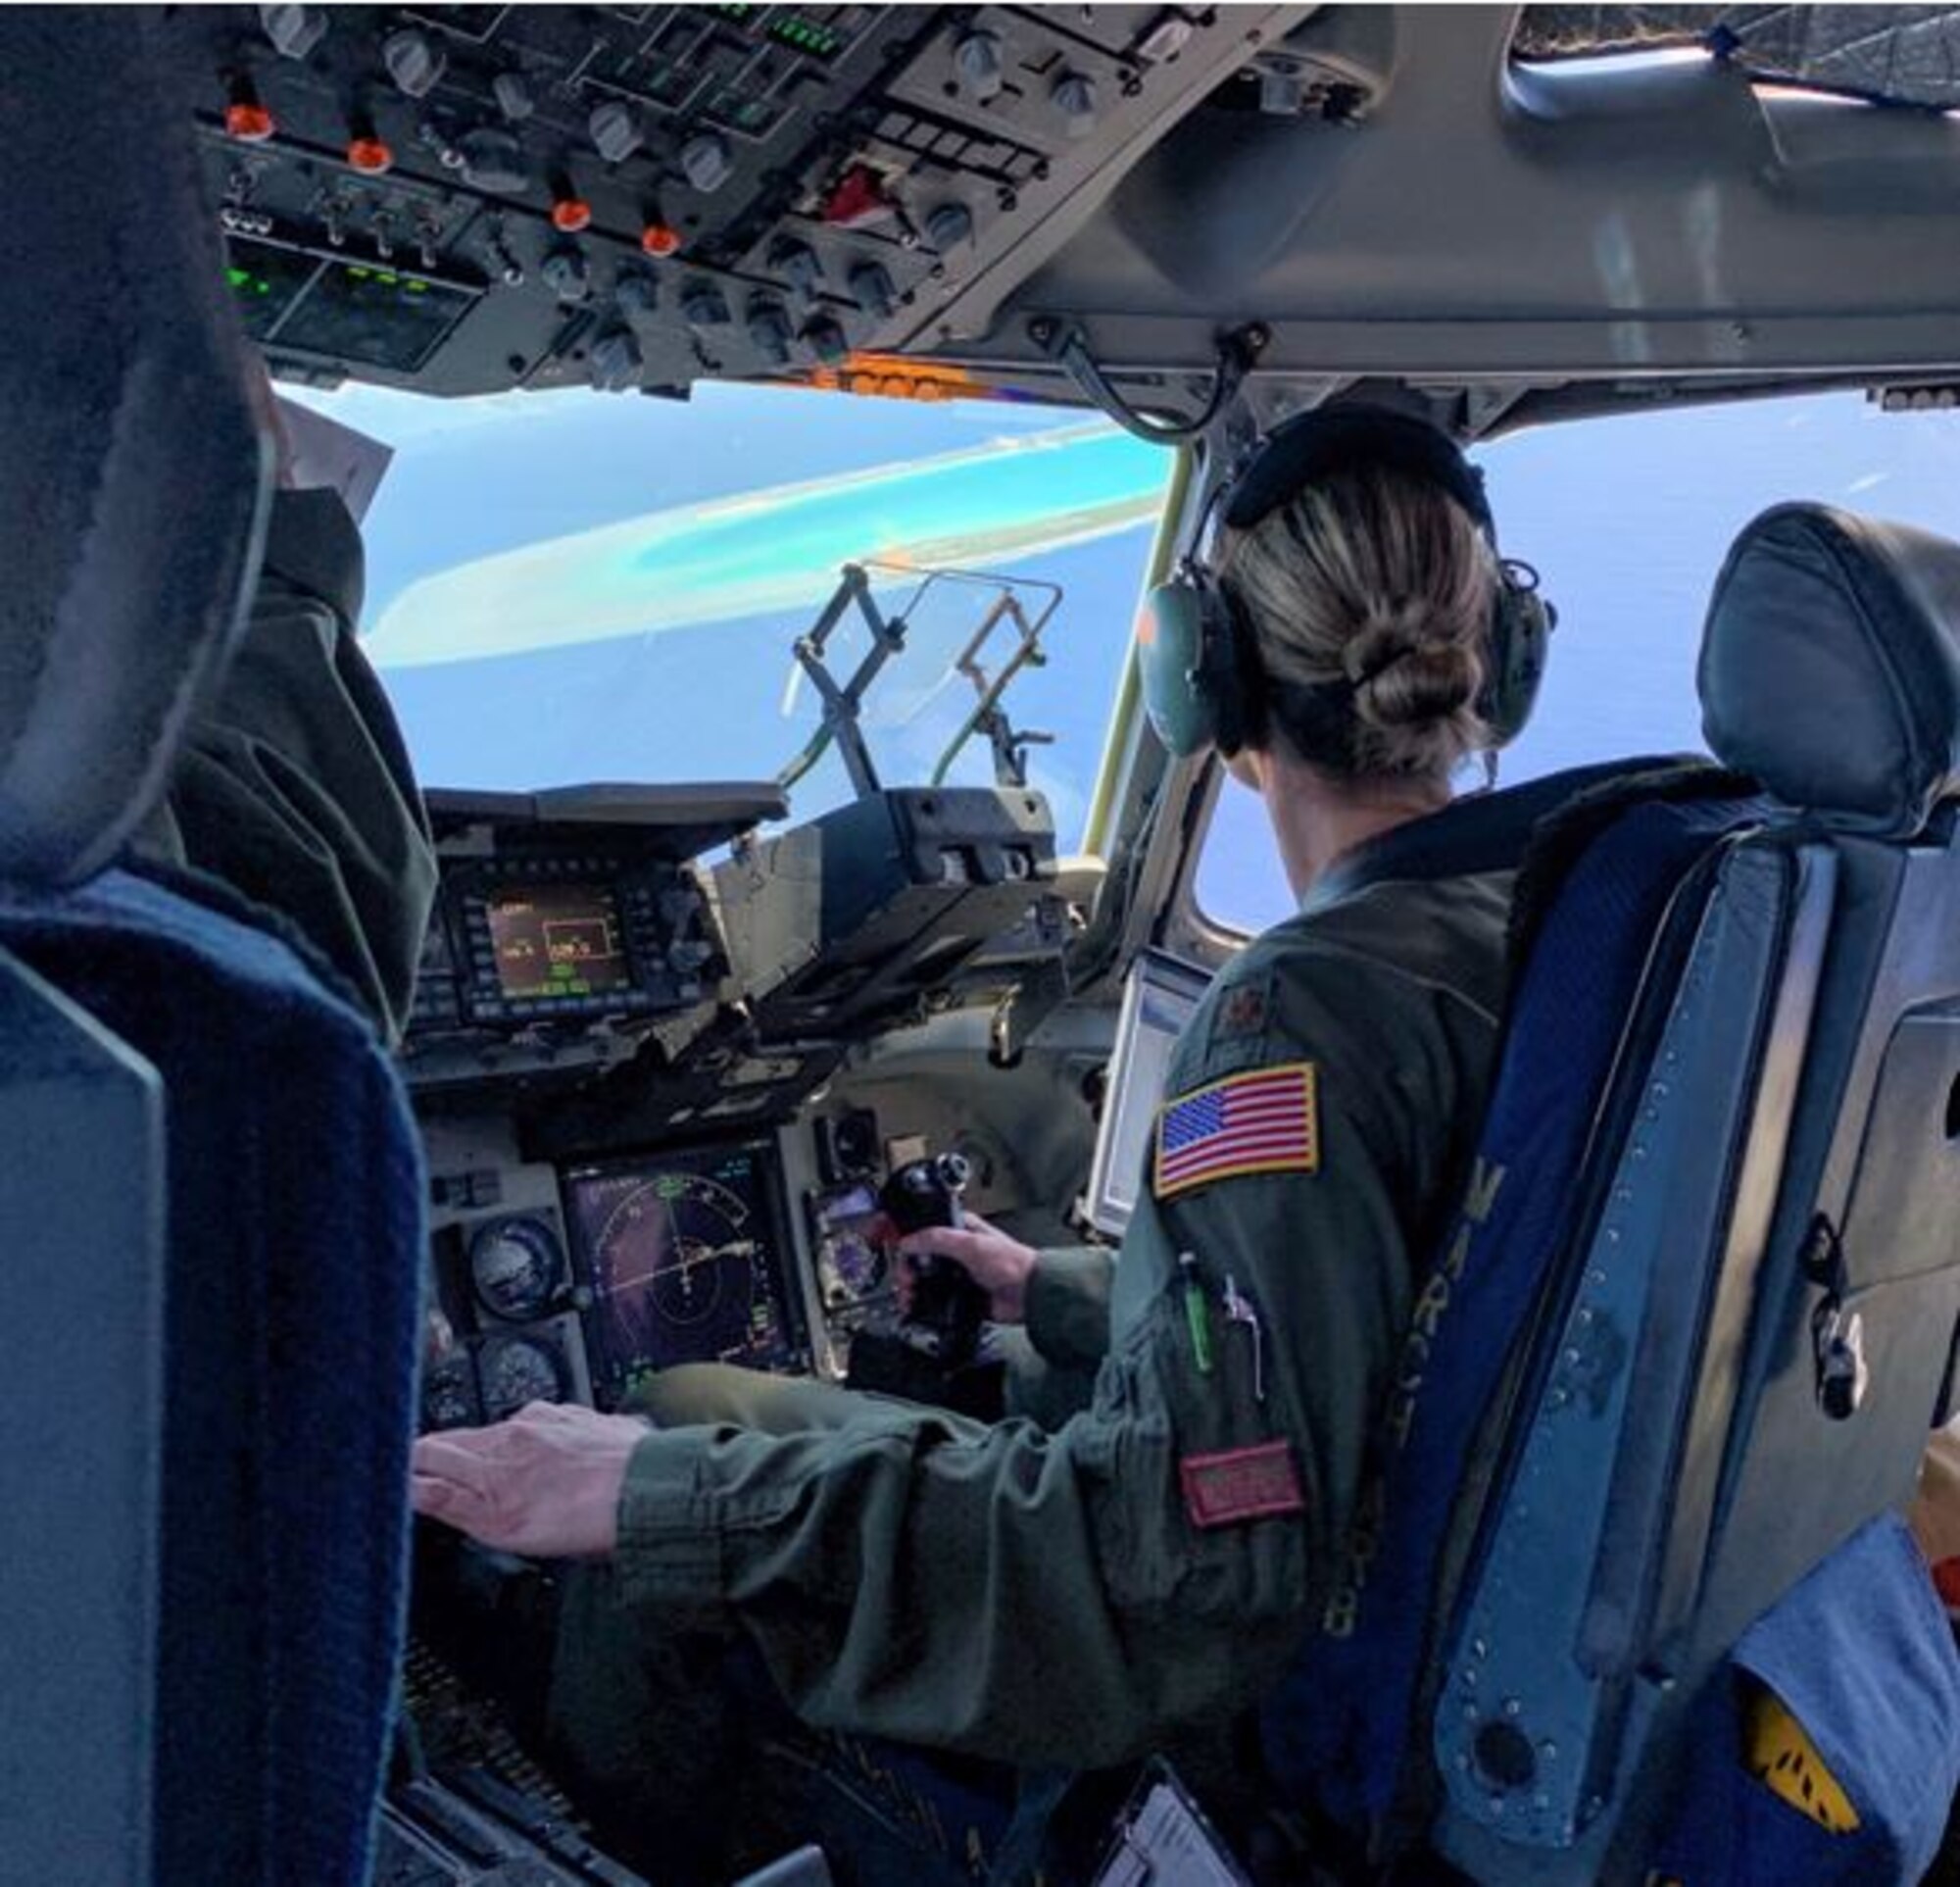 Female, Reserve Citizen Airmen assigned to the 729th Airlift Squadron and 452nd Aircraft Maintenance Squadron (AMXS) made history June 3, 2019, when embarked on a round-trip, Pacific mission as the first, all-female, C-17 Globemaster III aircrew in March Air Reserve Base’s 101-year history. Attending their send-off was local resident and legendary, 97-year-old, Women's Airforce Service Pilot Margo DeMoss, and 452nd Air Mobility Wing Commander, Col. Melissa Coburn.